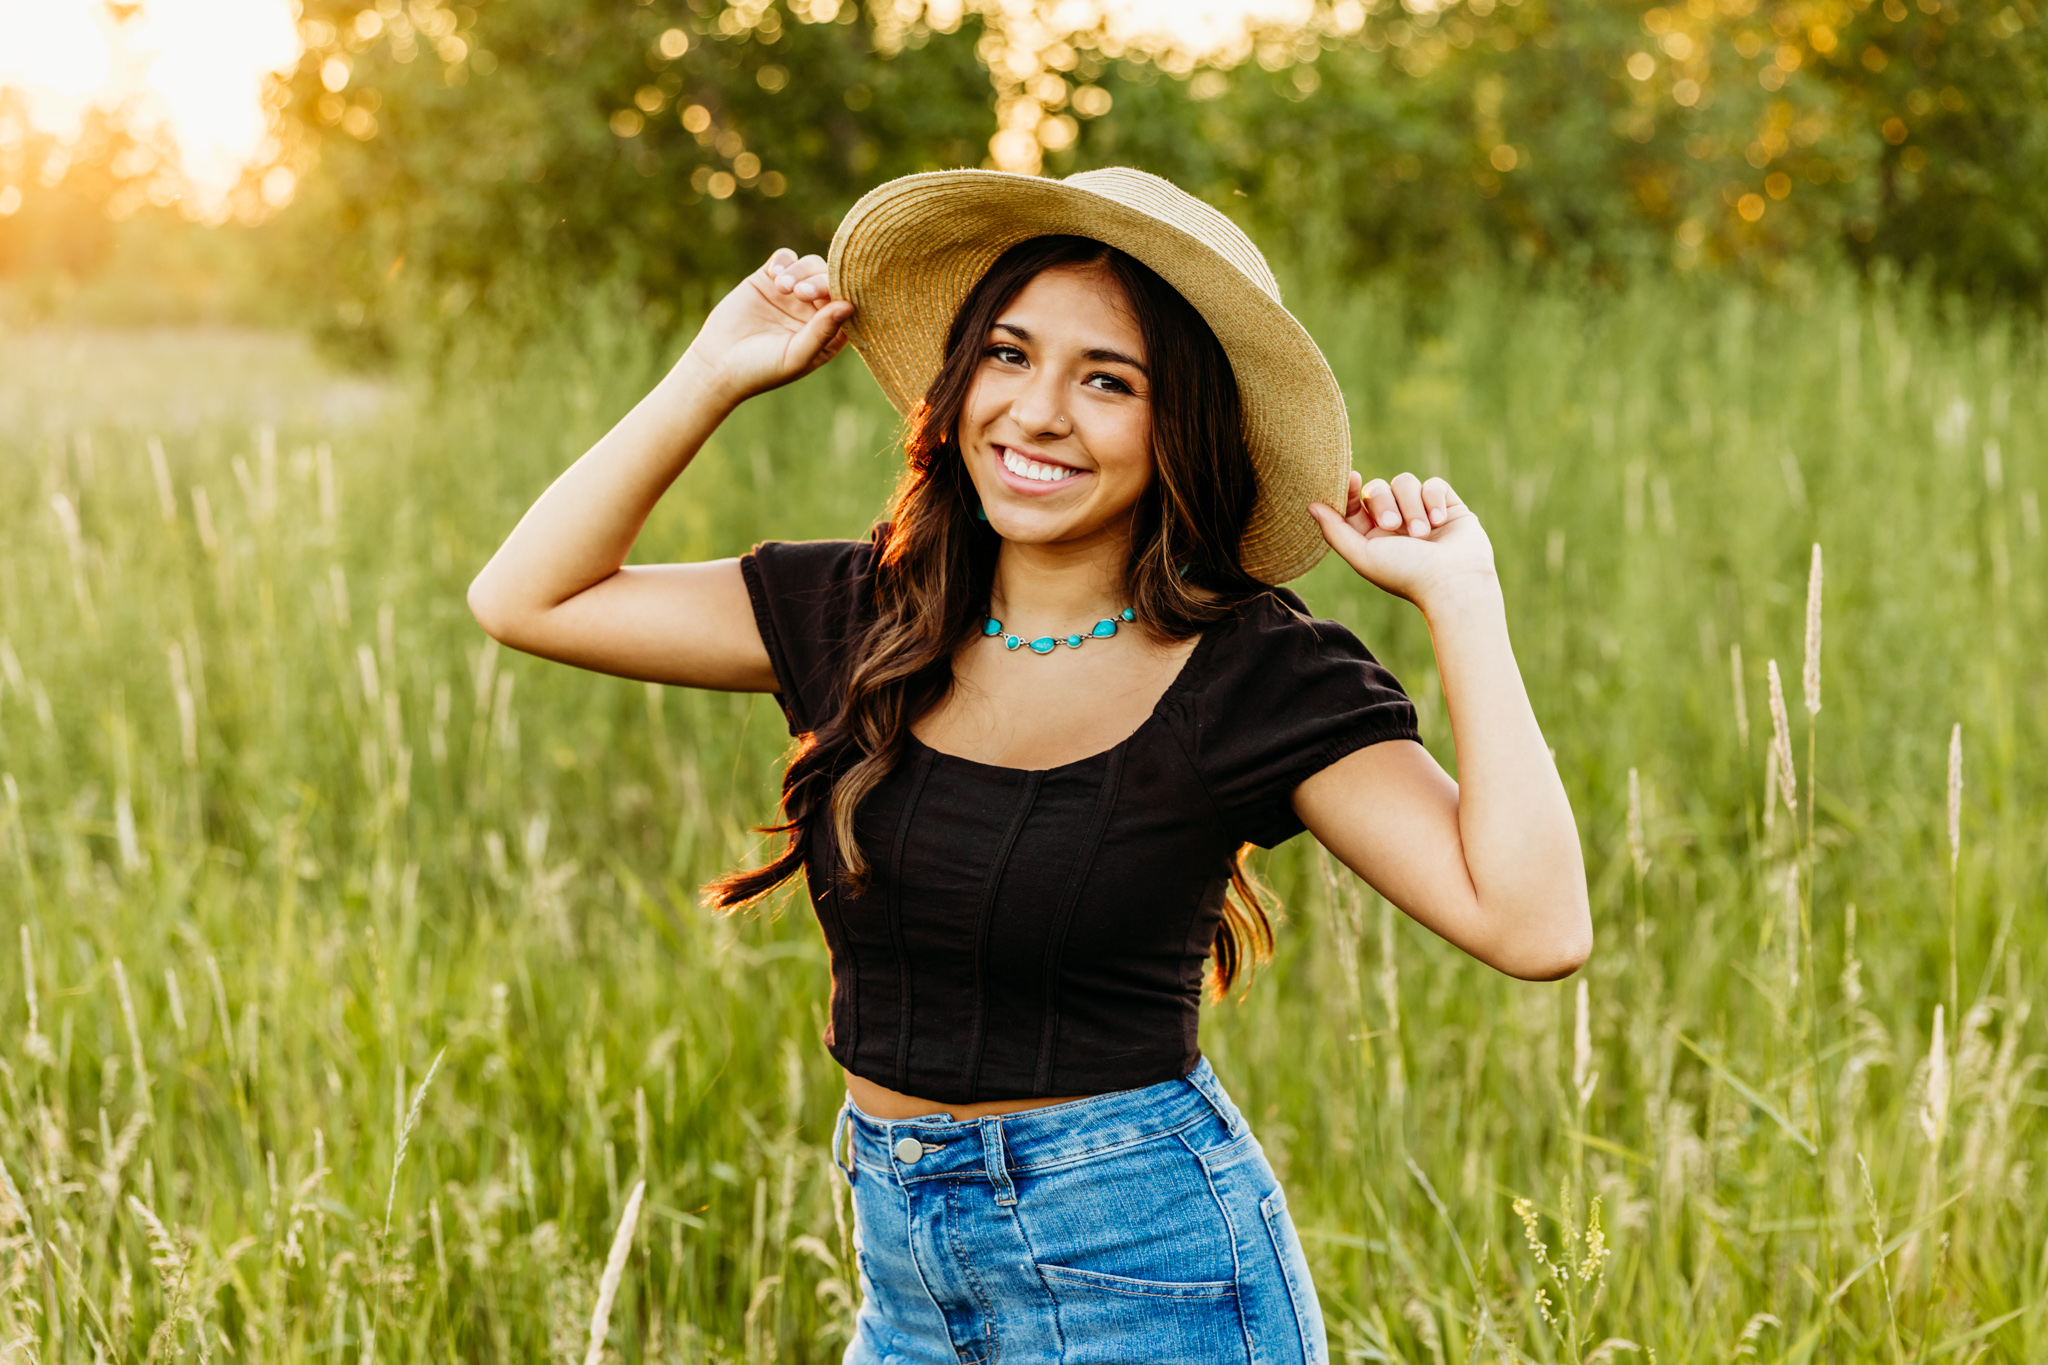 young lady in a black top and denim pants standing with a straw sunhat on and her hands holding each side of the hat as the sun sets behind her